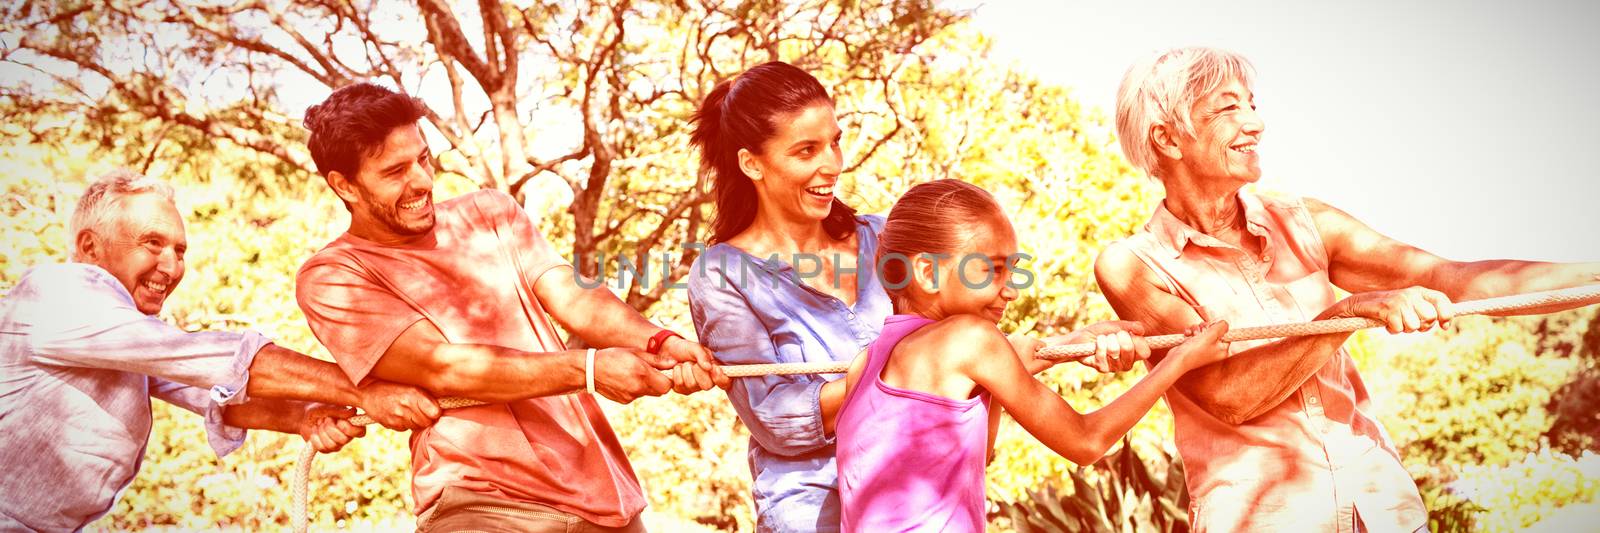 Family playing tug of war in the park by Wavebreakmedia